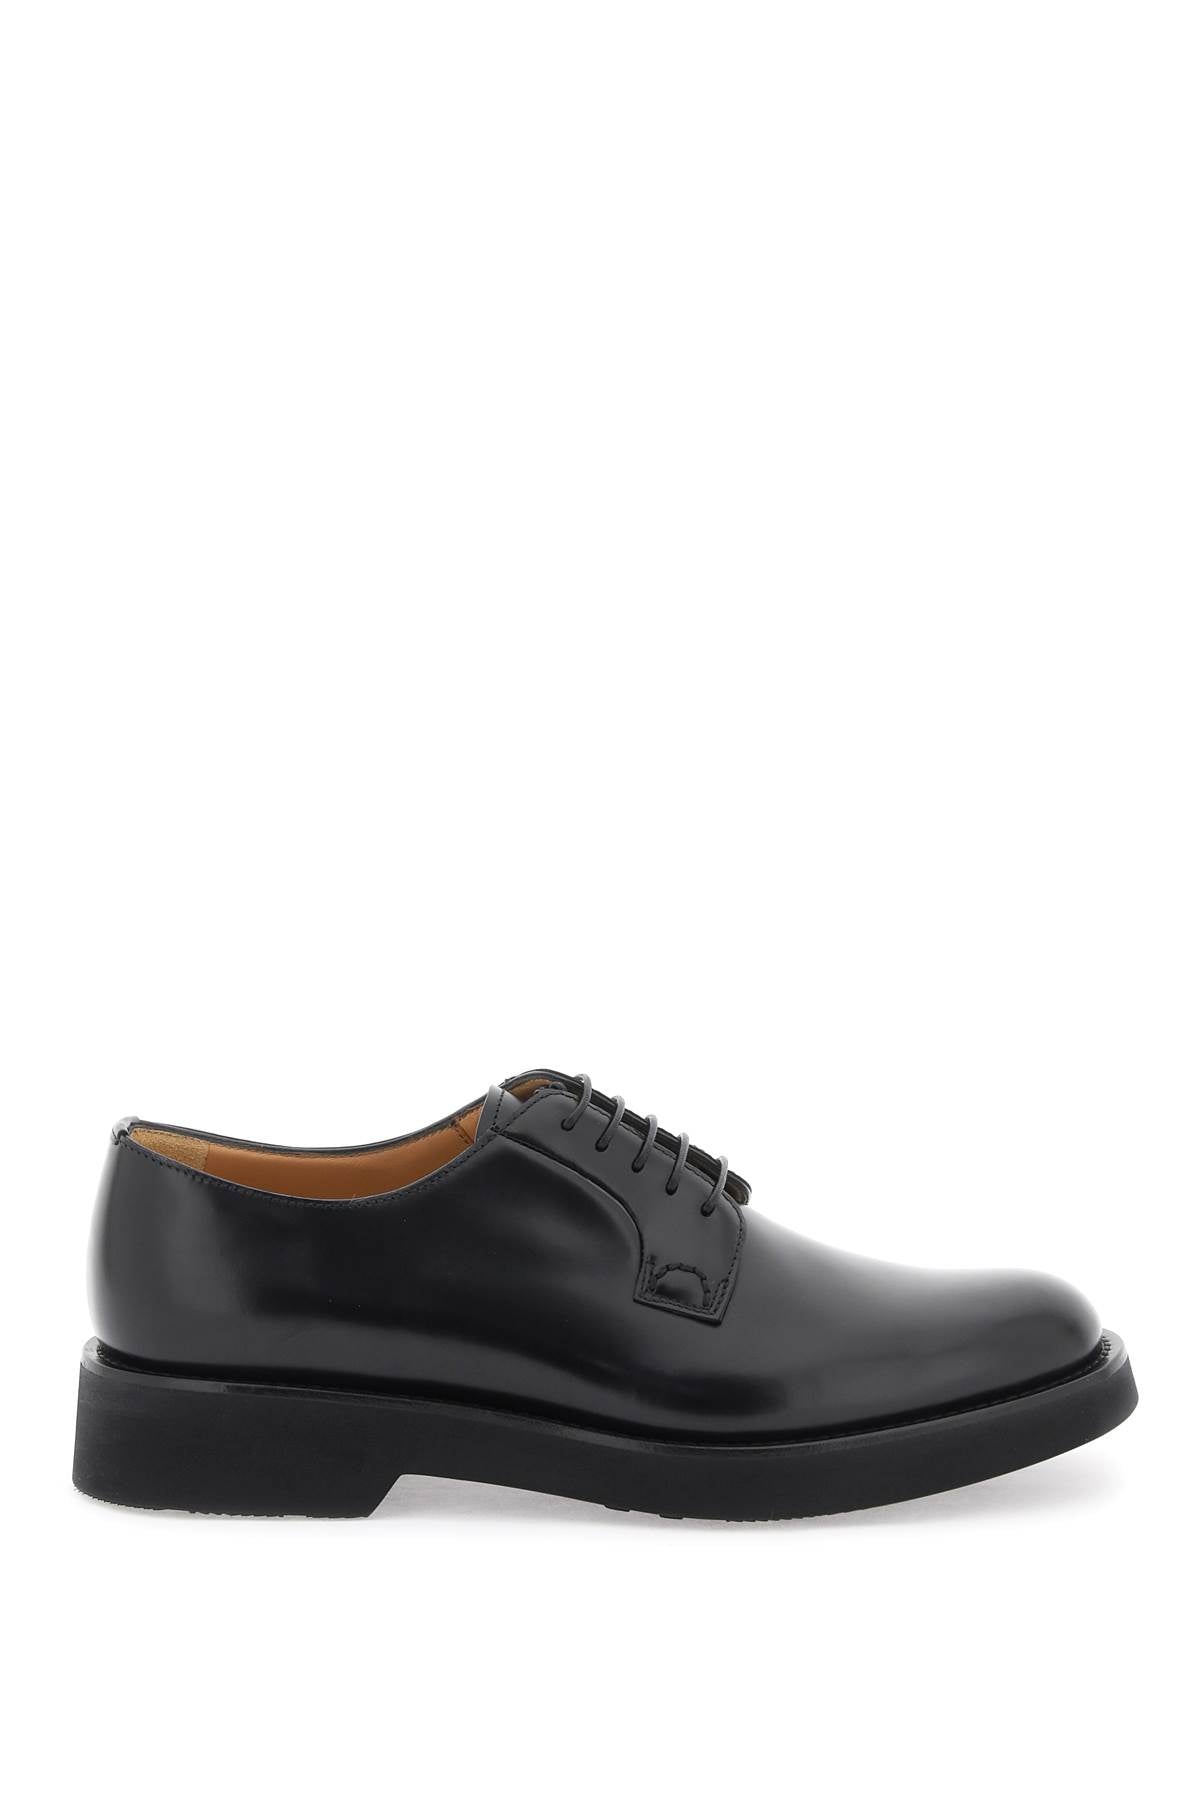 Church's leather shannon derby shoes-0